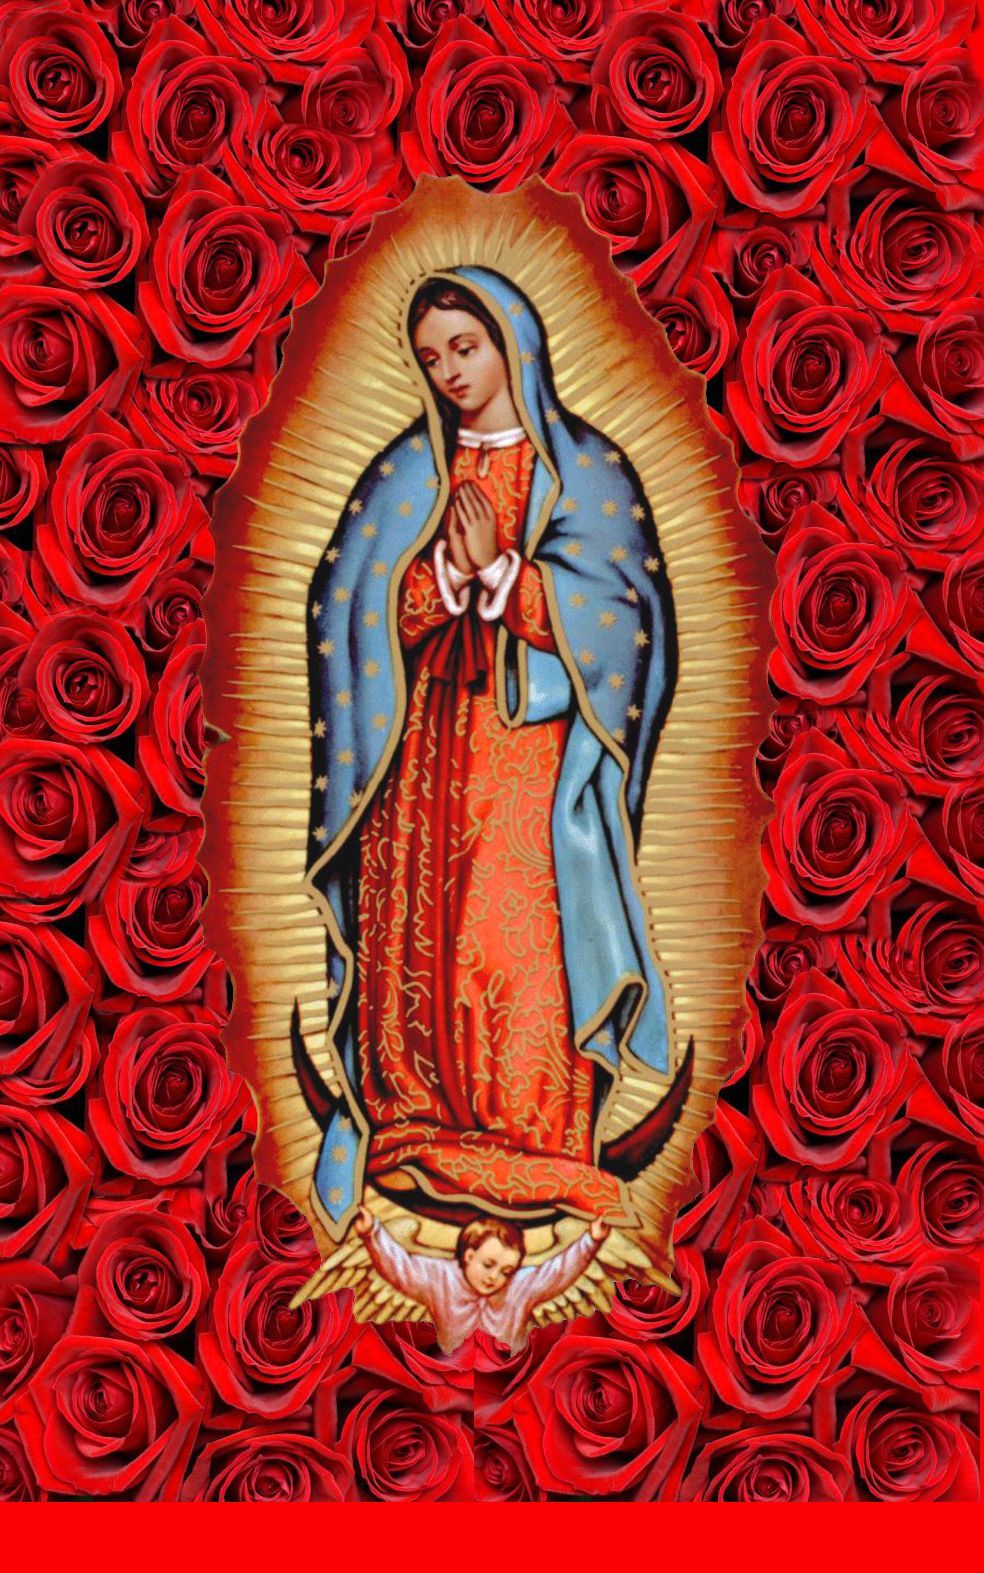 Wallpaper Virgen De Guadalupe With Roses